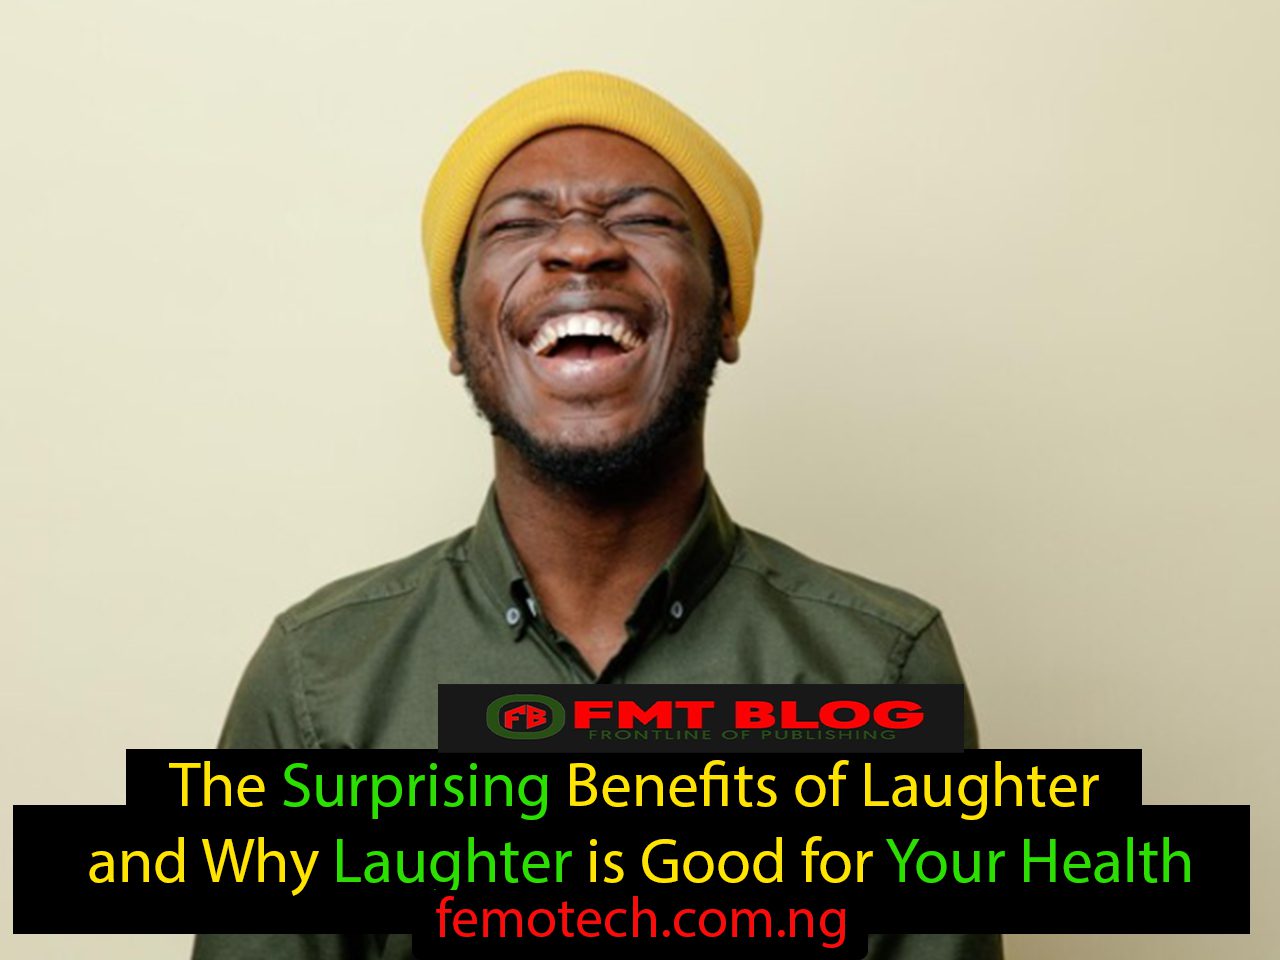 The Surprising Benefits of Laughter and Why Laughter is Good for Your Health